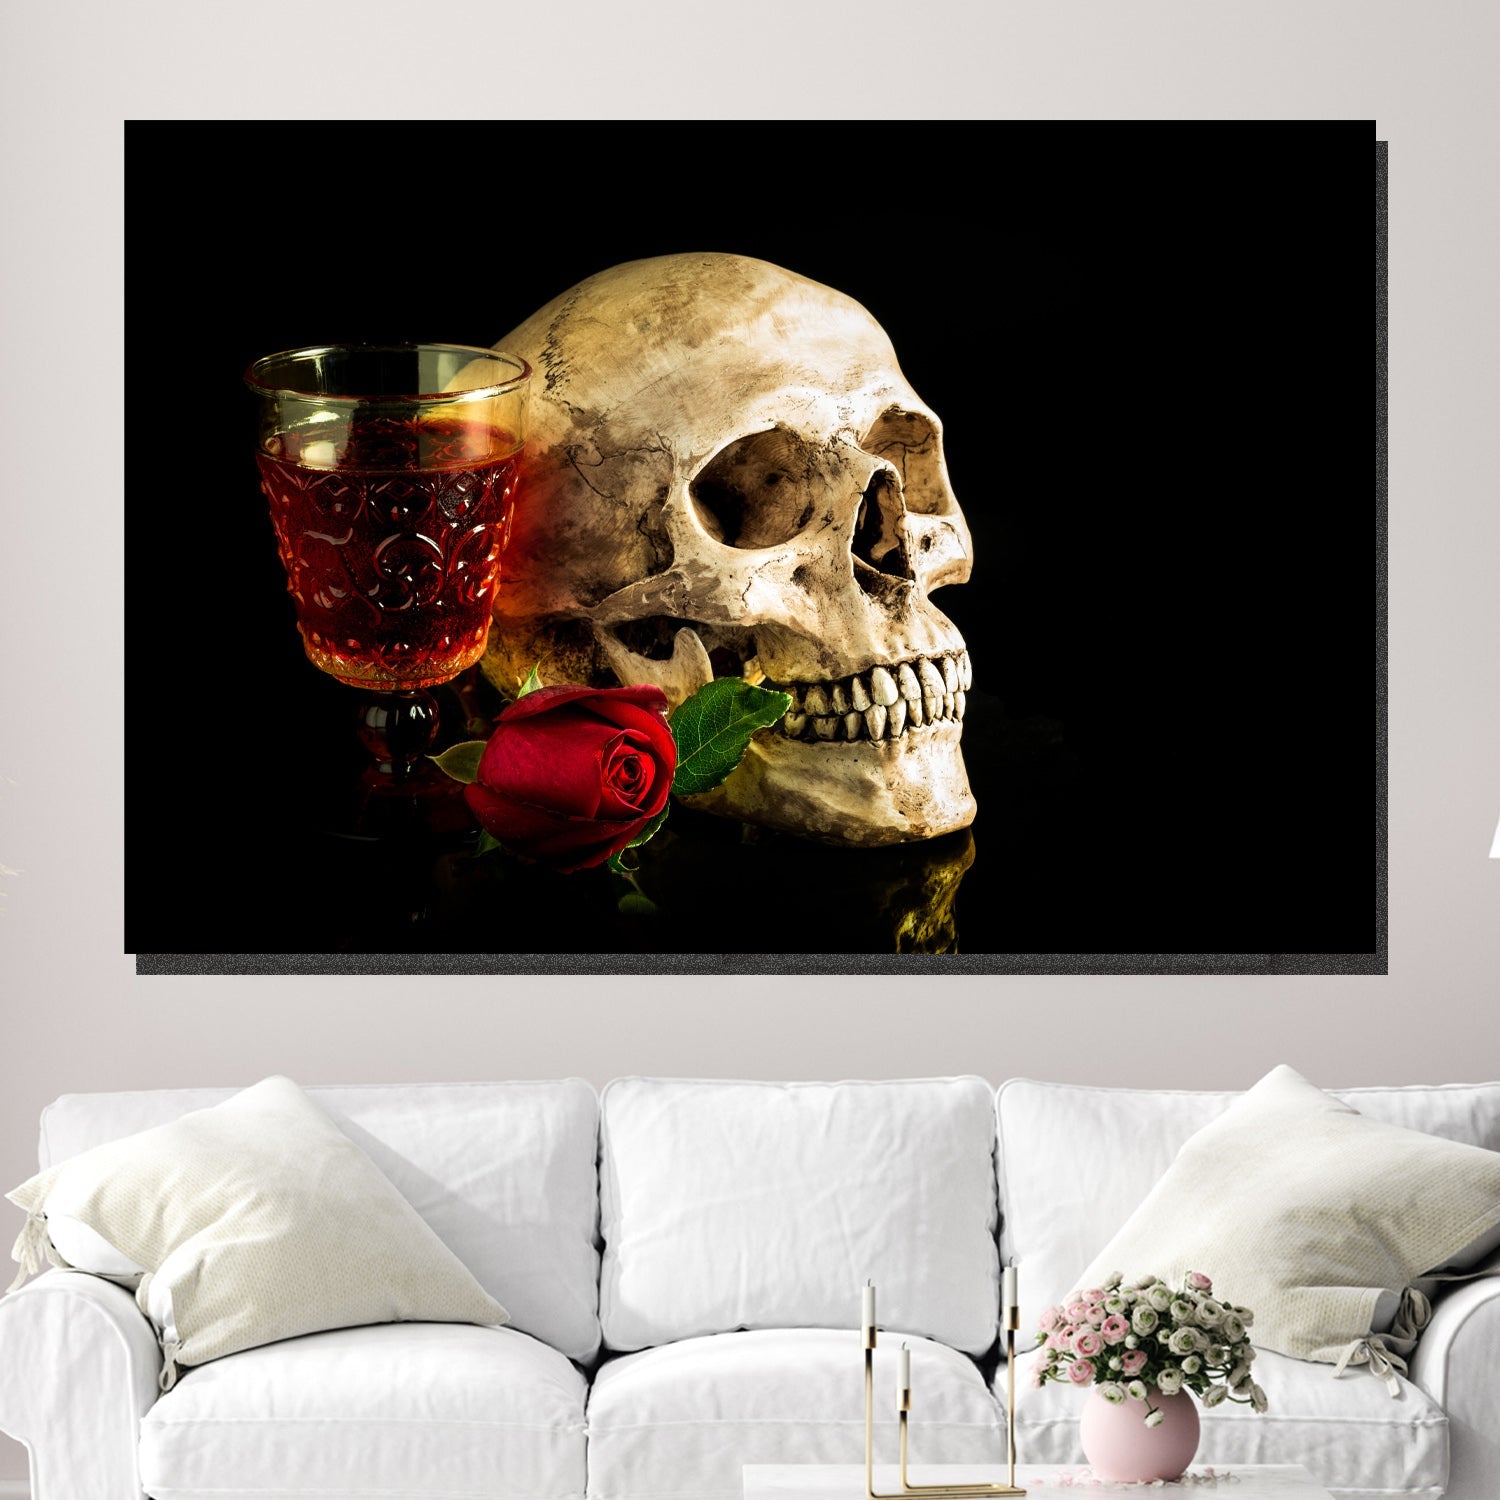 https://cdn.shopify.com/s/files/1/0387/9986/8044/products/SkullwithaDrinkCanvasArtprintStretched-3.jpg